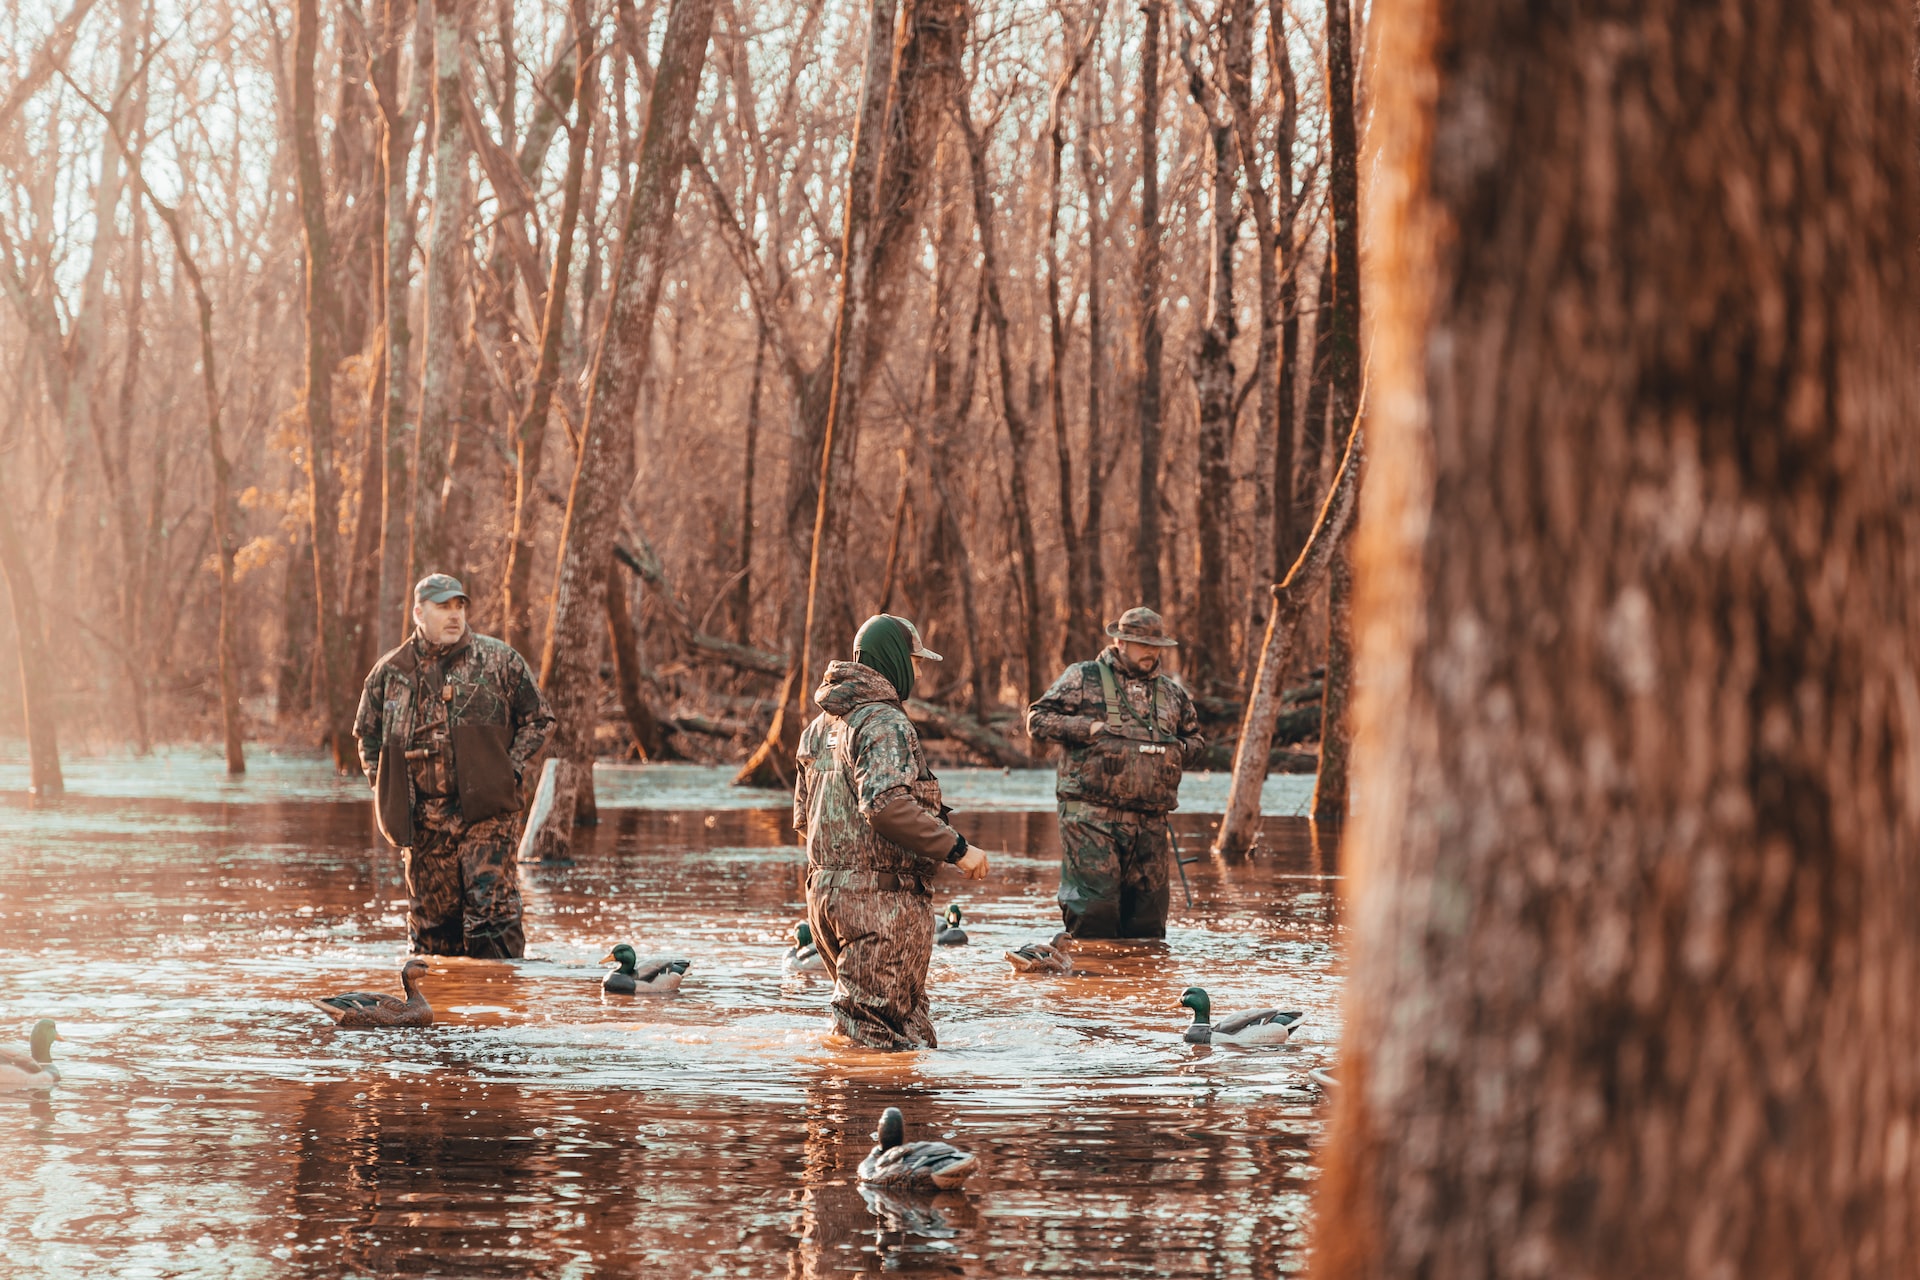 Three duck hunters wading in flooded timber.